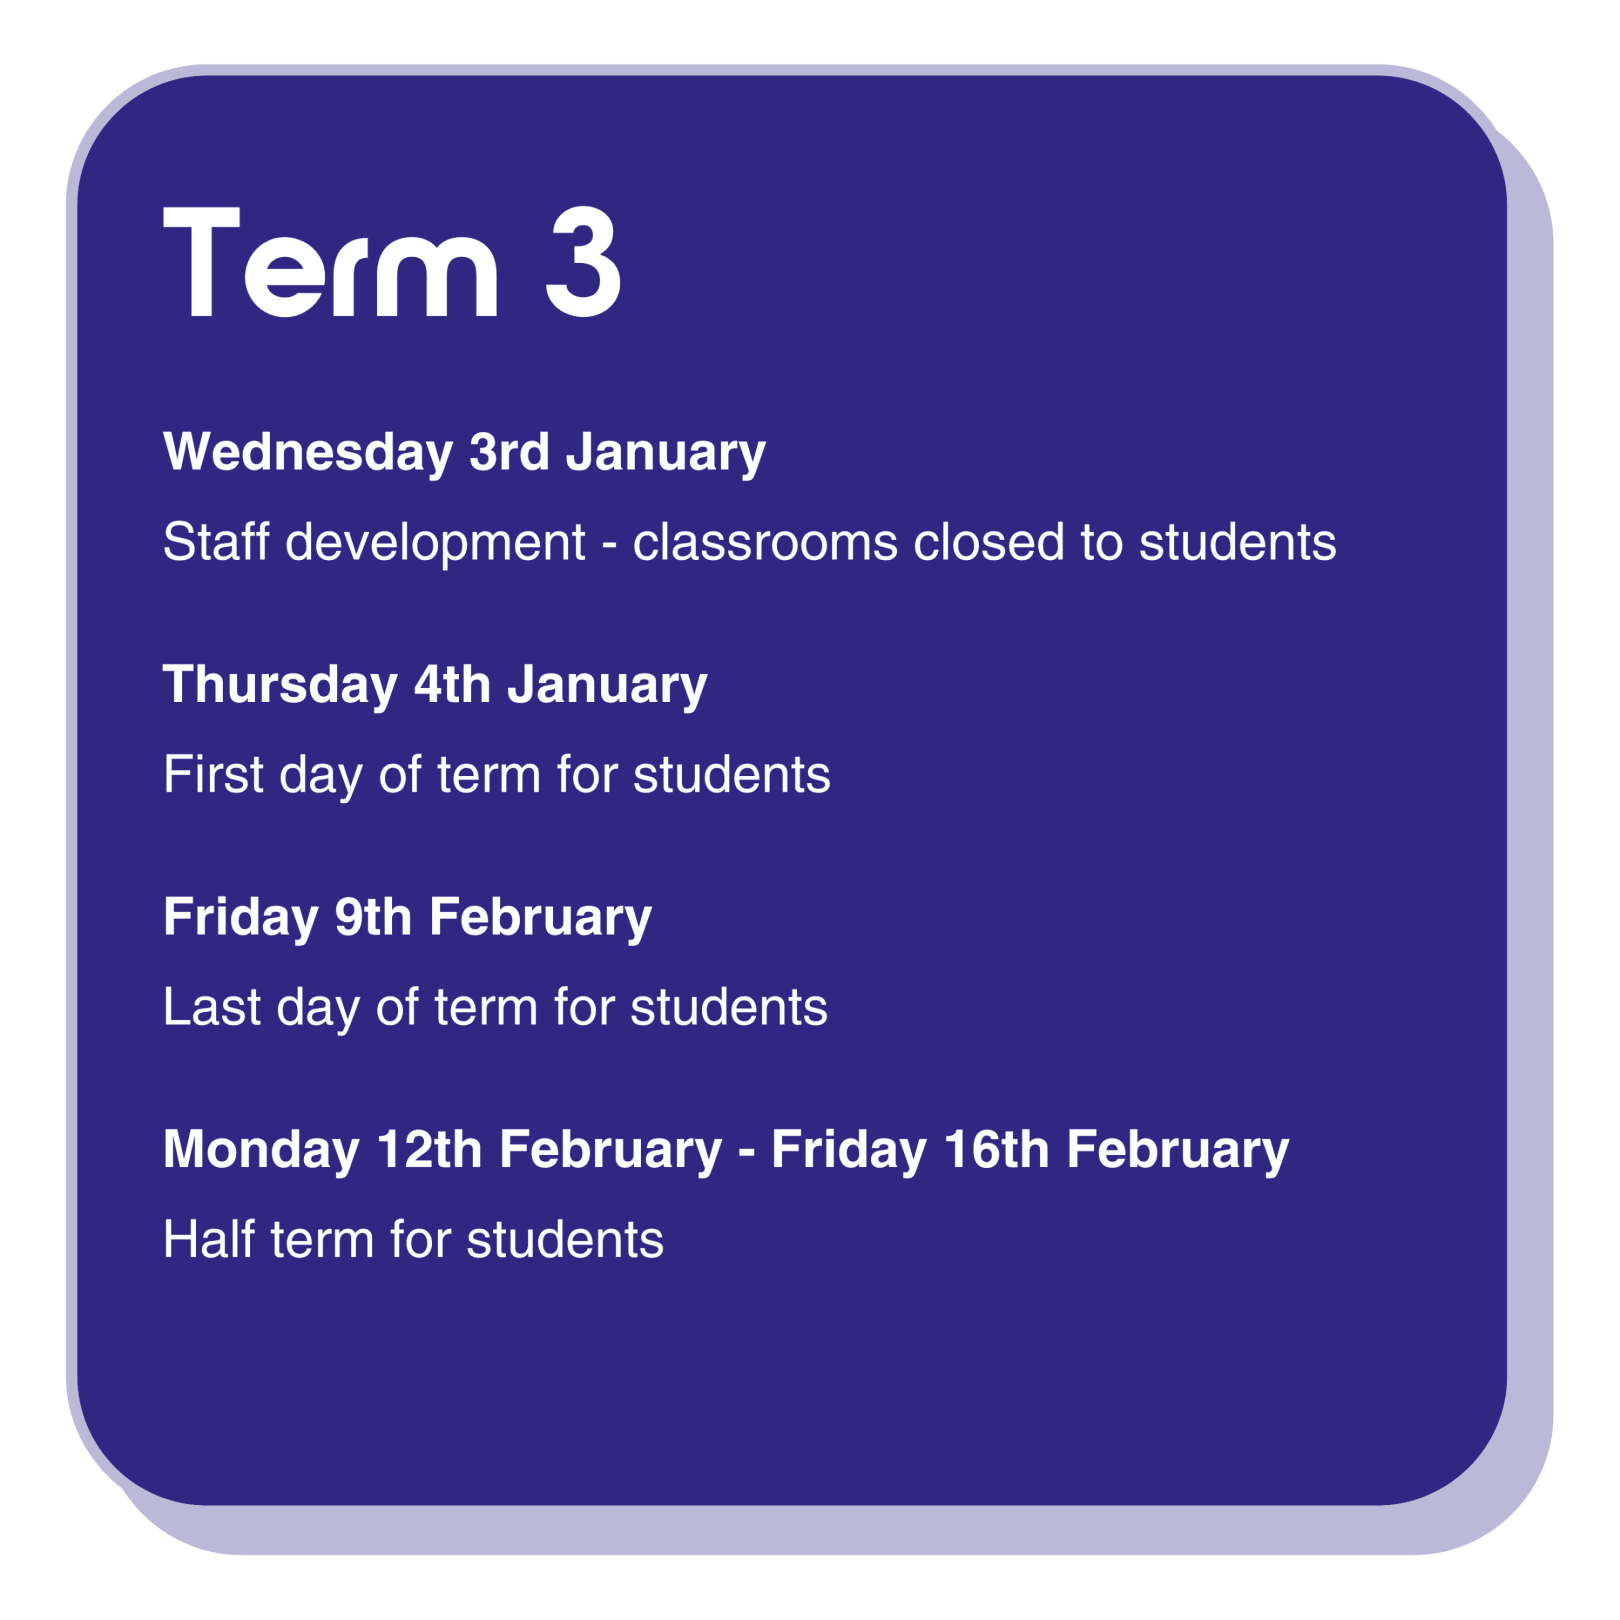 Term 3 dates information infographic with the following text:  Wednesday 3rd January is a staff development day, classrooms are closed to students. Thursday 4th January is the first day of term for students. Friday 9th February is the last day of term for students. Monday 12th February - Friday 16th February is half term for students.